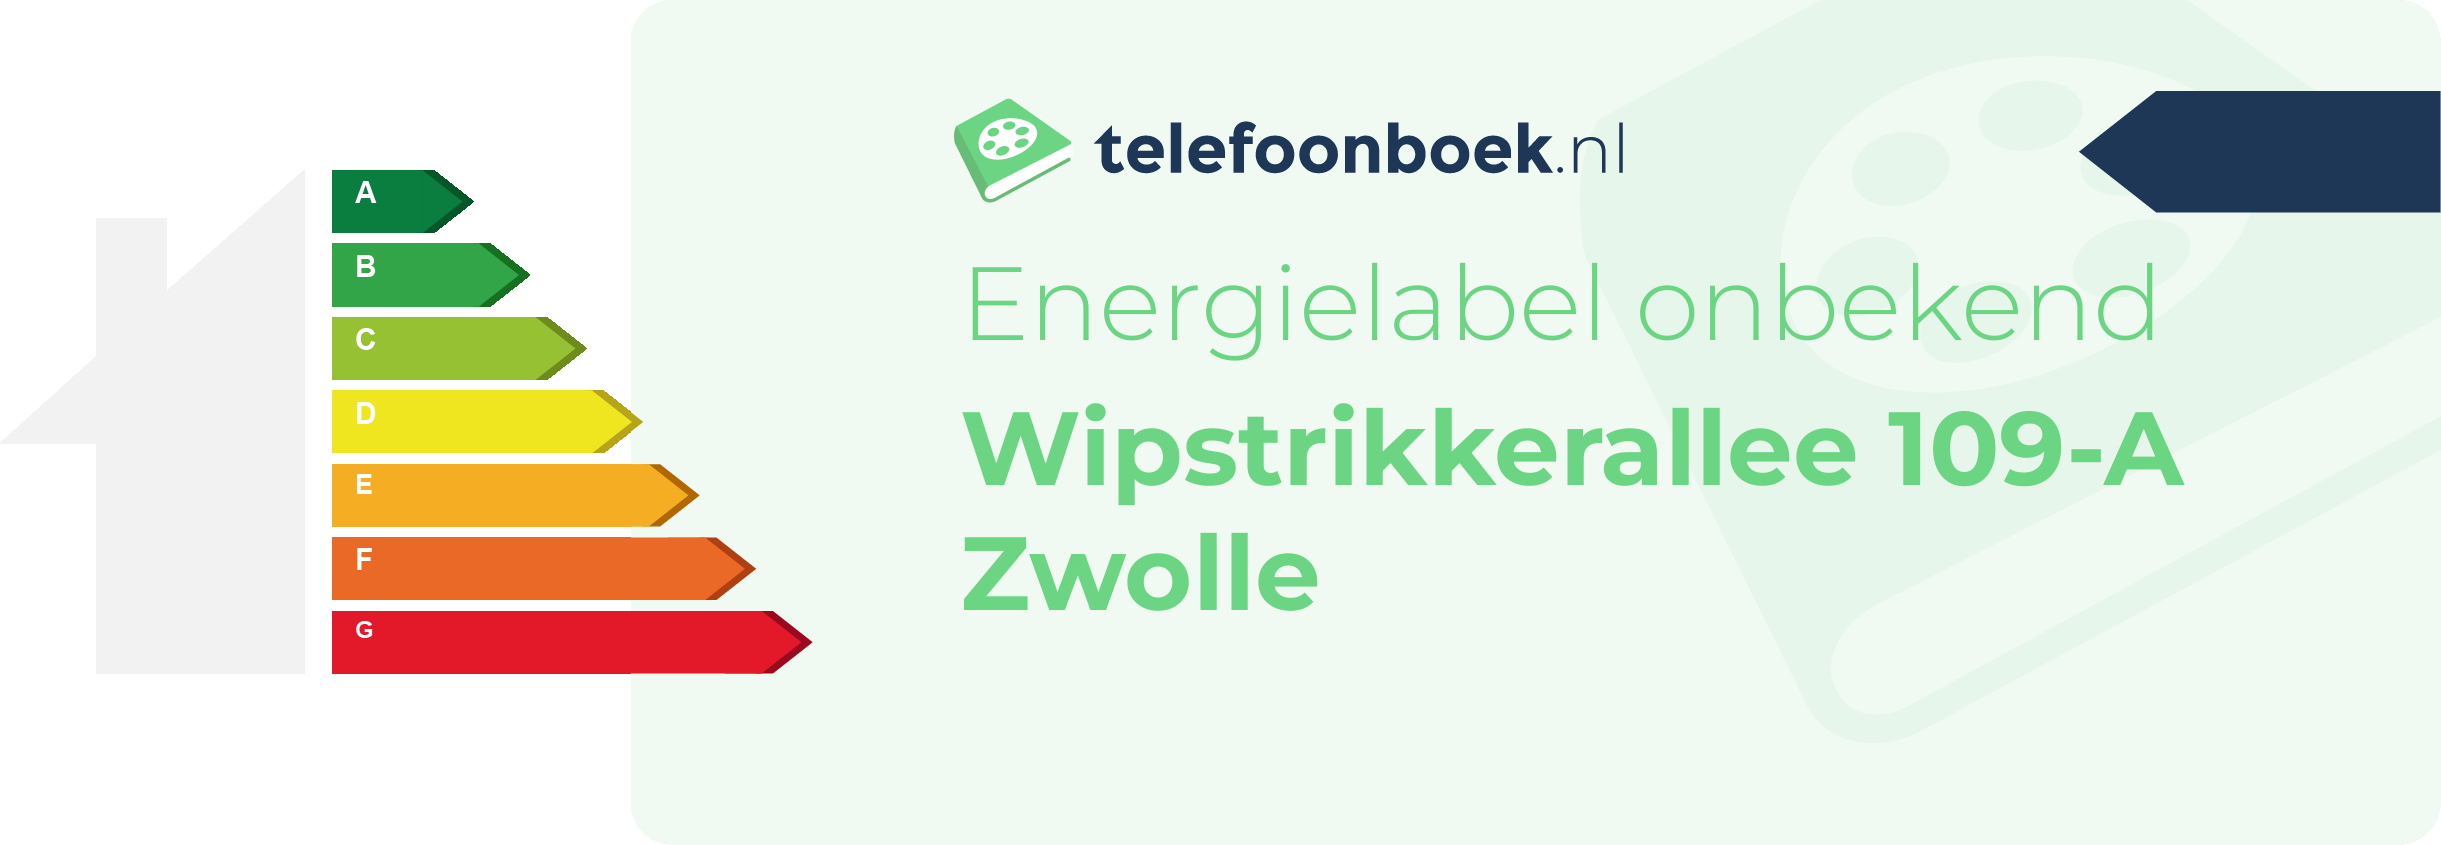 Energielabel Wipstrikkerallee 109-A Zwolle